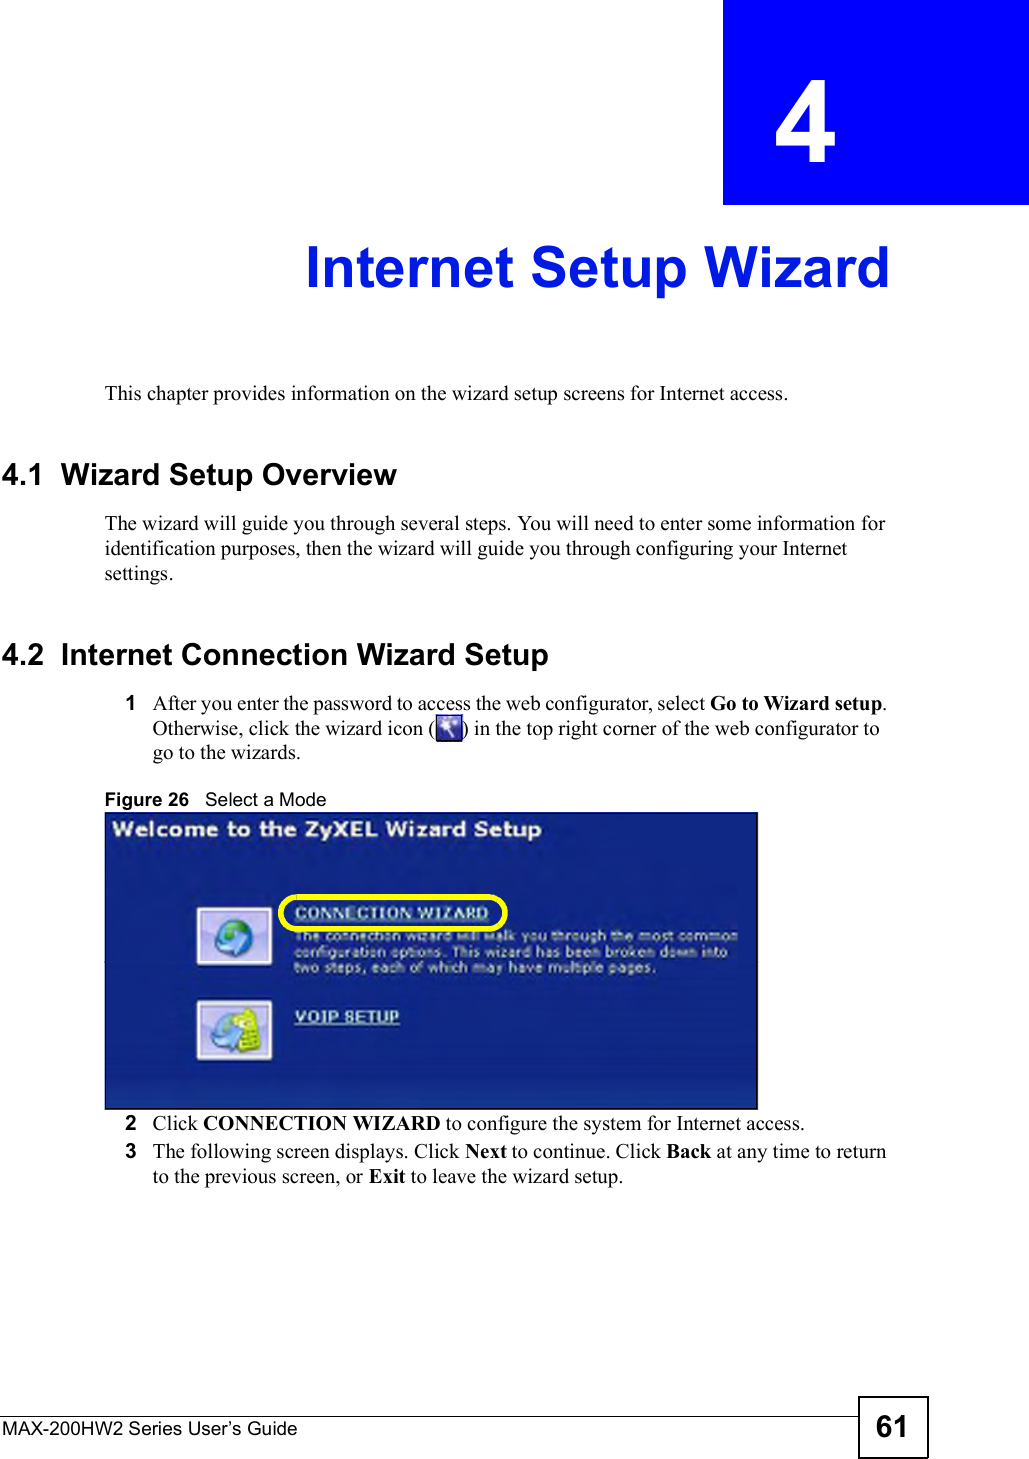 MAX-200HW2 Series User s Guide 61CHAPTER  4 Internet Setup WizardThis chapter provides information on the wizard setup screens for Internet access.4.1  Wizard Setup OverviewThe wizard will guide you through several steps. You will need to enter some information for identification purposes, then the wizard will guide you through configuring your Internet settings.4.2  Internet Connection Wizard Setup1After you enter the password to access the web configurator, select Go to Wizard setup.Otherwise, click the wizard icon () in the top right corner of the web configuratortogo to the wizards. Figure 26   Select a Mode2Click CONNECTION WIZARD to configure the system for Internet access.3The following screen displays. Click Next to continue. Click Back at any time to return to the previous screen, or Exit to leave the wizard setup.